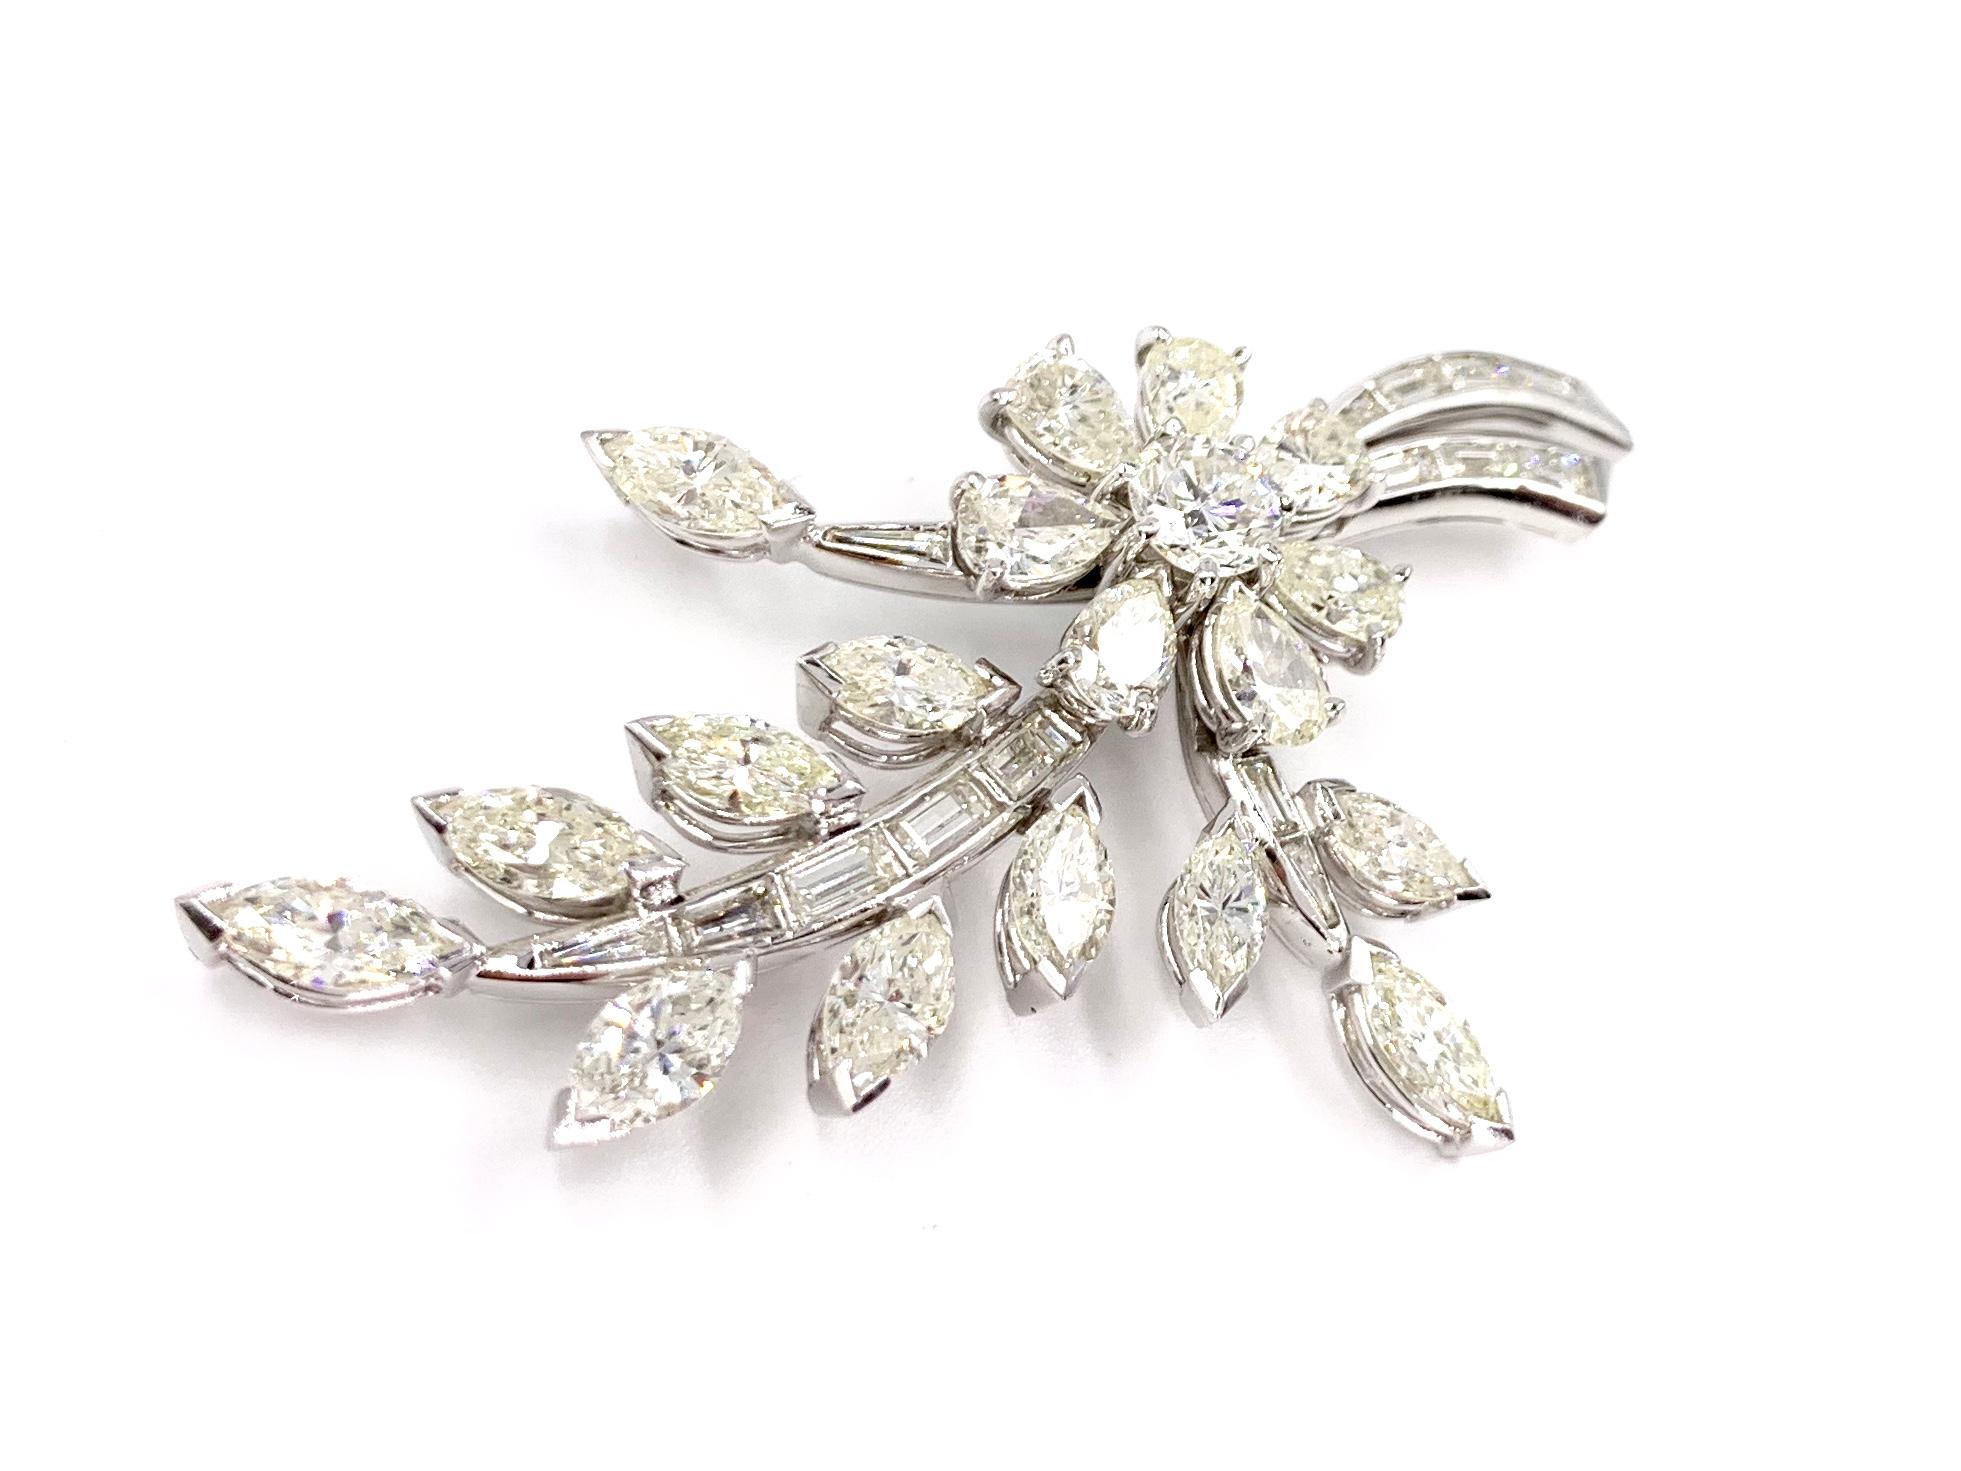 An elegant and feminine floral platinum diamond spray brooch. The flower showcases a .62 carat round brilliant diamond center (approximately I color, VS2 clarity) surrounded by seven pear shape diamond petals at approximately 1.80 carats total